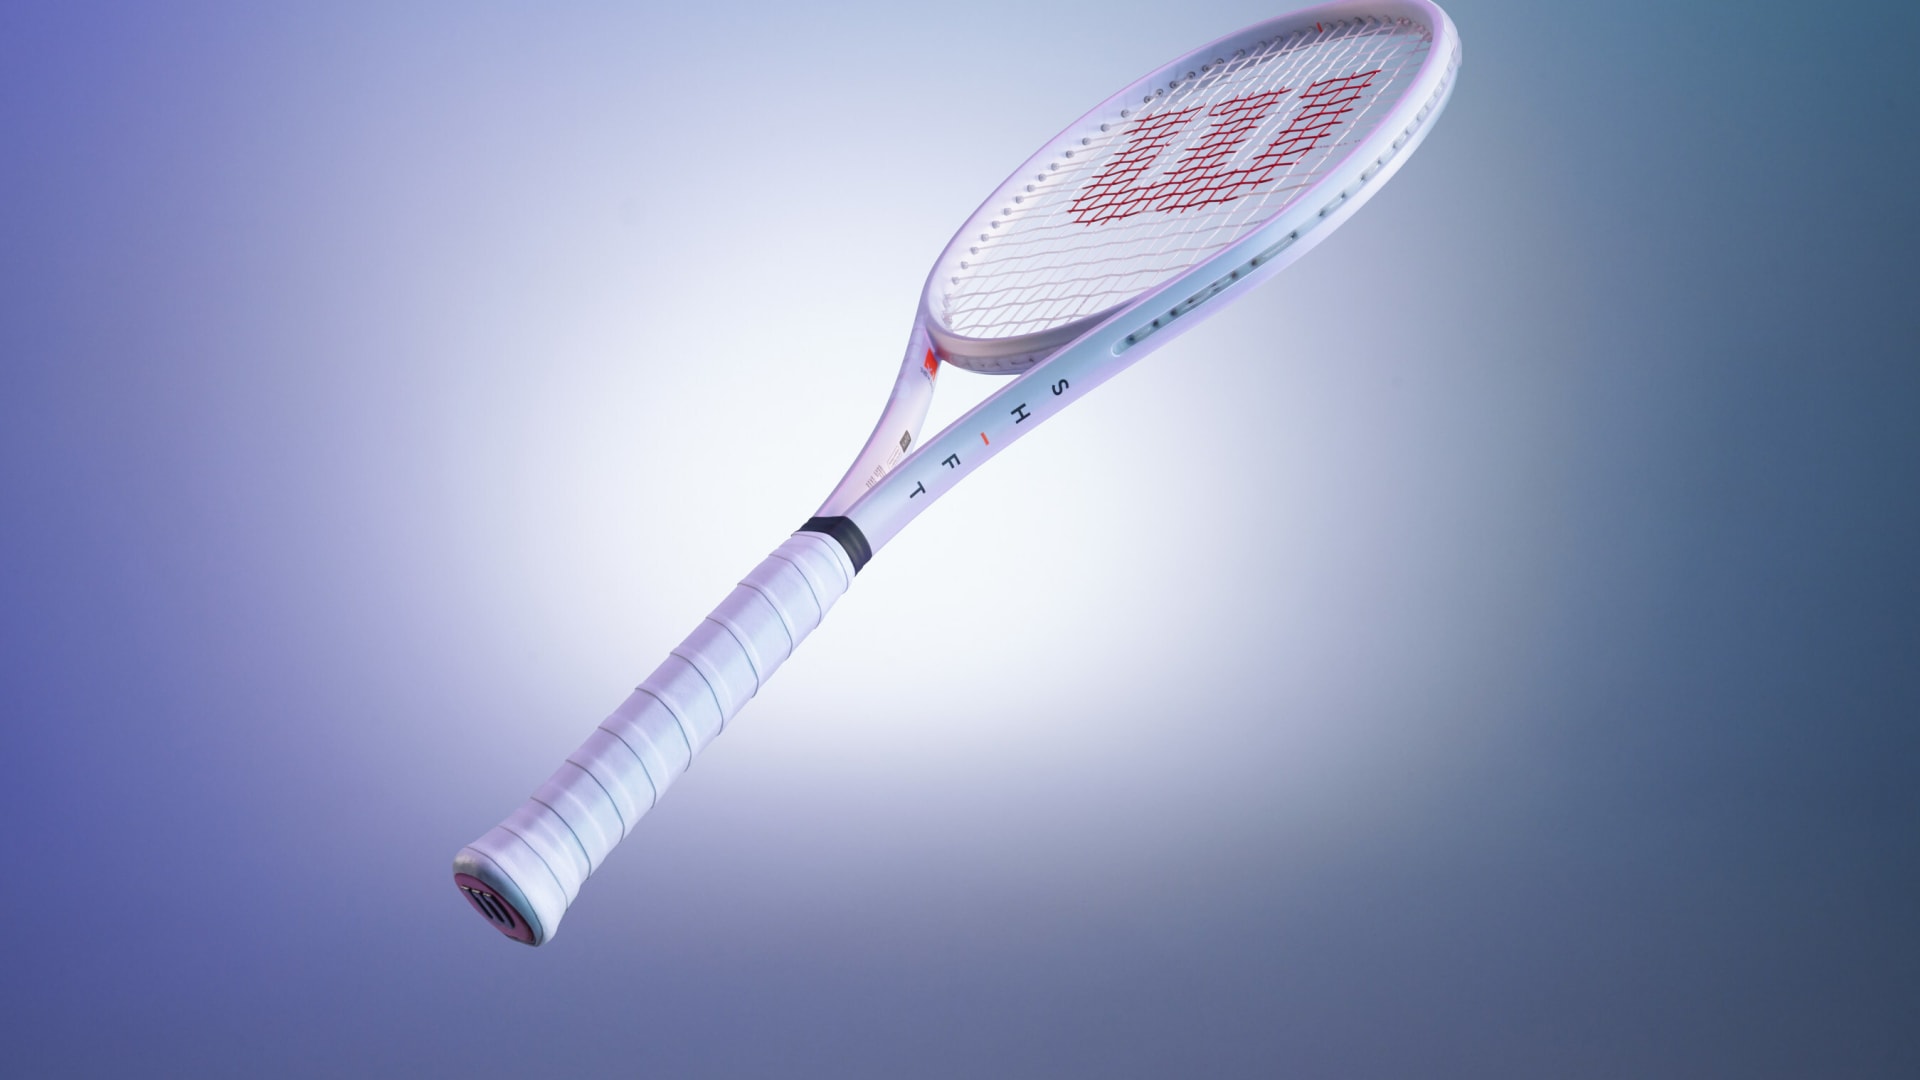 Ready for takeoff: Wilson launches Shift v1 racquet franchise